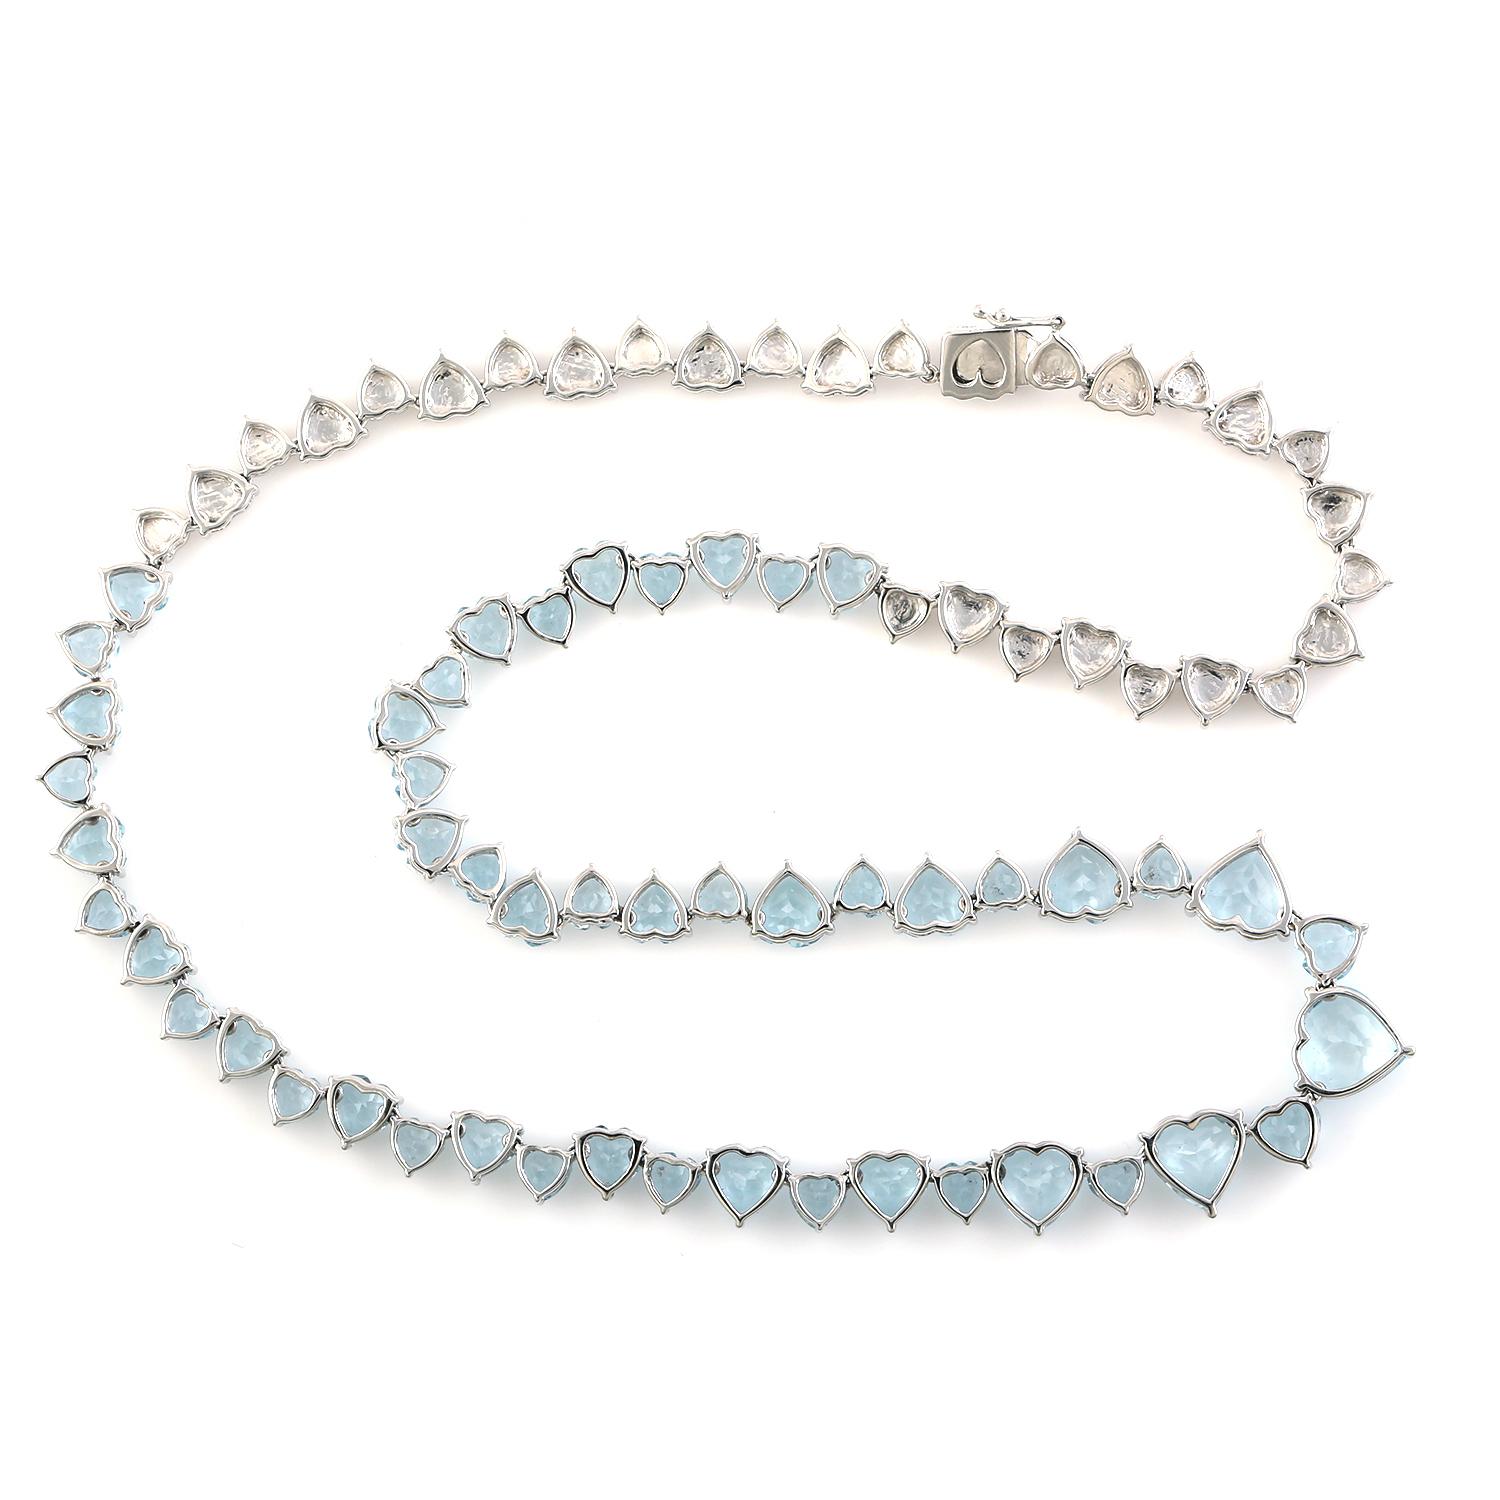 Mixed Cut 32.59 ct Heart Shaped Aquamarine Necklace Made In 18k White Gold For Sale